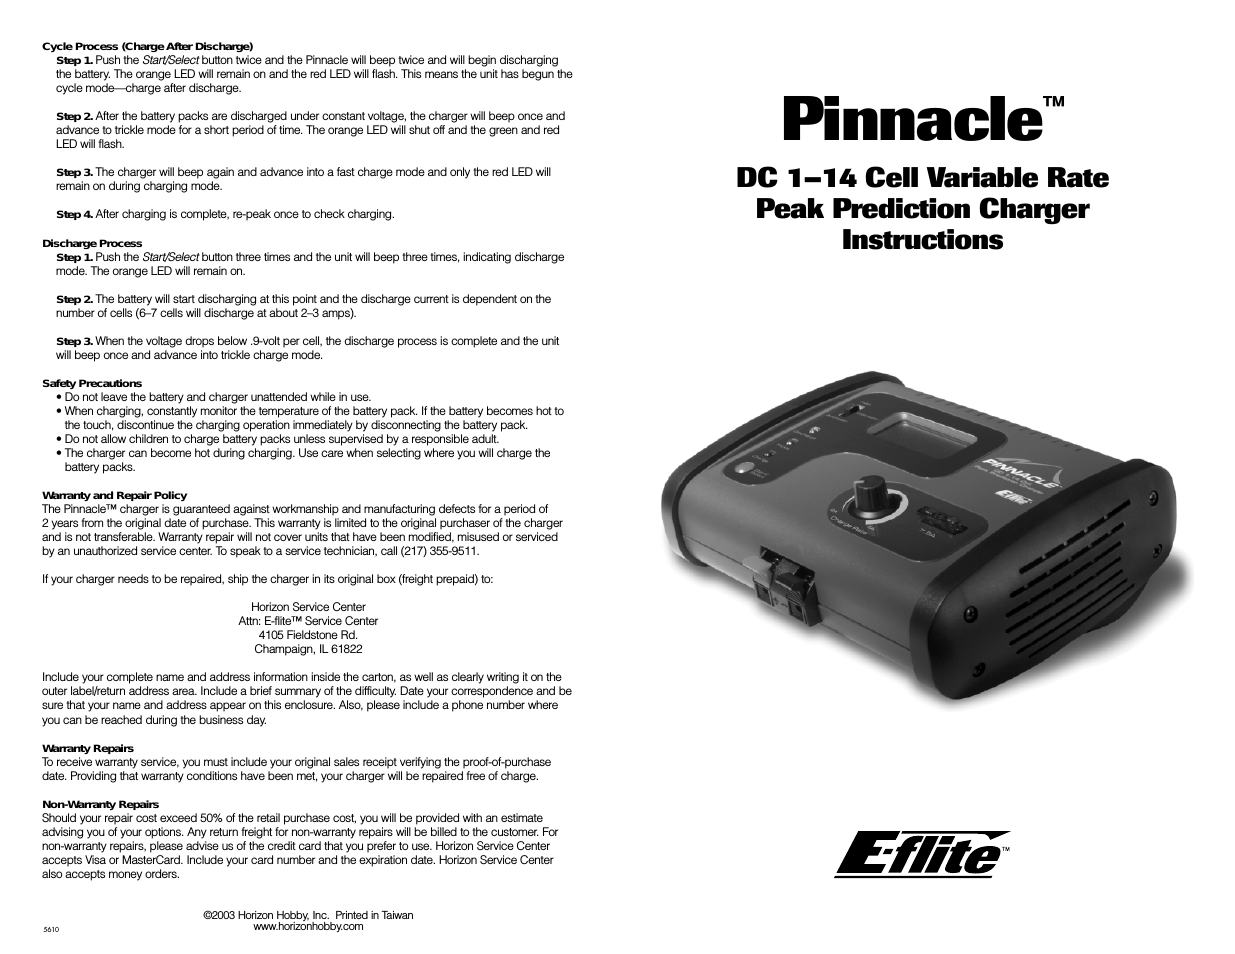 Pinnacle DC 1-14C Peak Charger with LCD